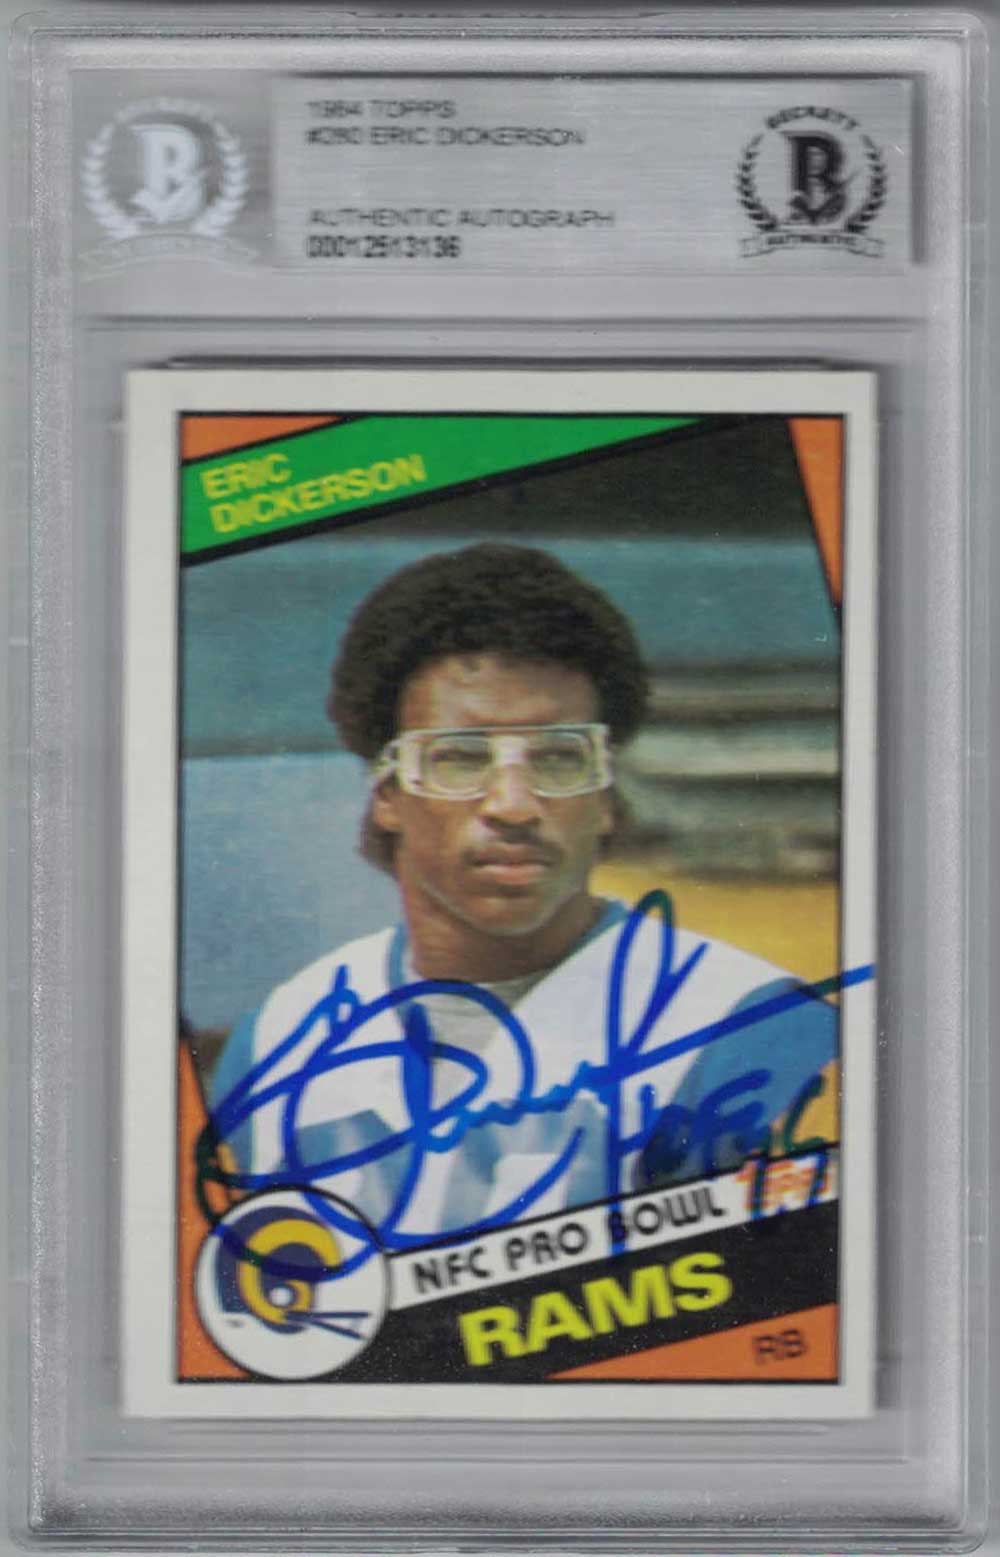 Eric Dickerson Signed Los Angeles Rams 1984 Topps Trading Card BAS Slab 29563